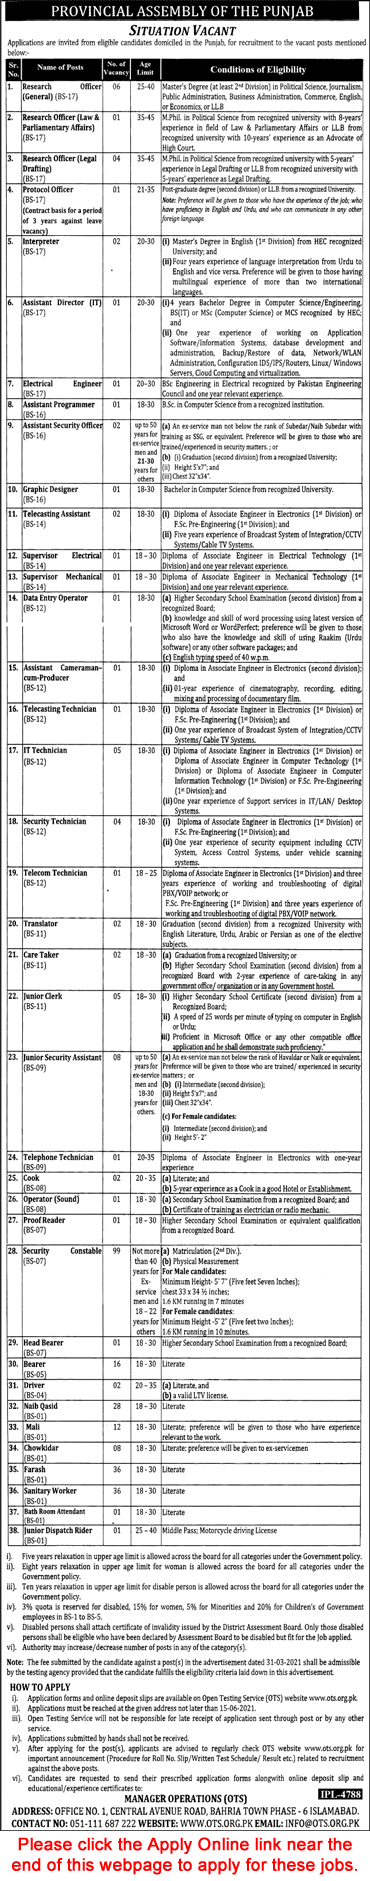 Provincial Assembly of Punjab Jobs May 2021 OTS Application Form Security Constables & Others Latest